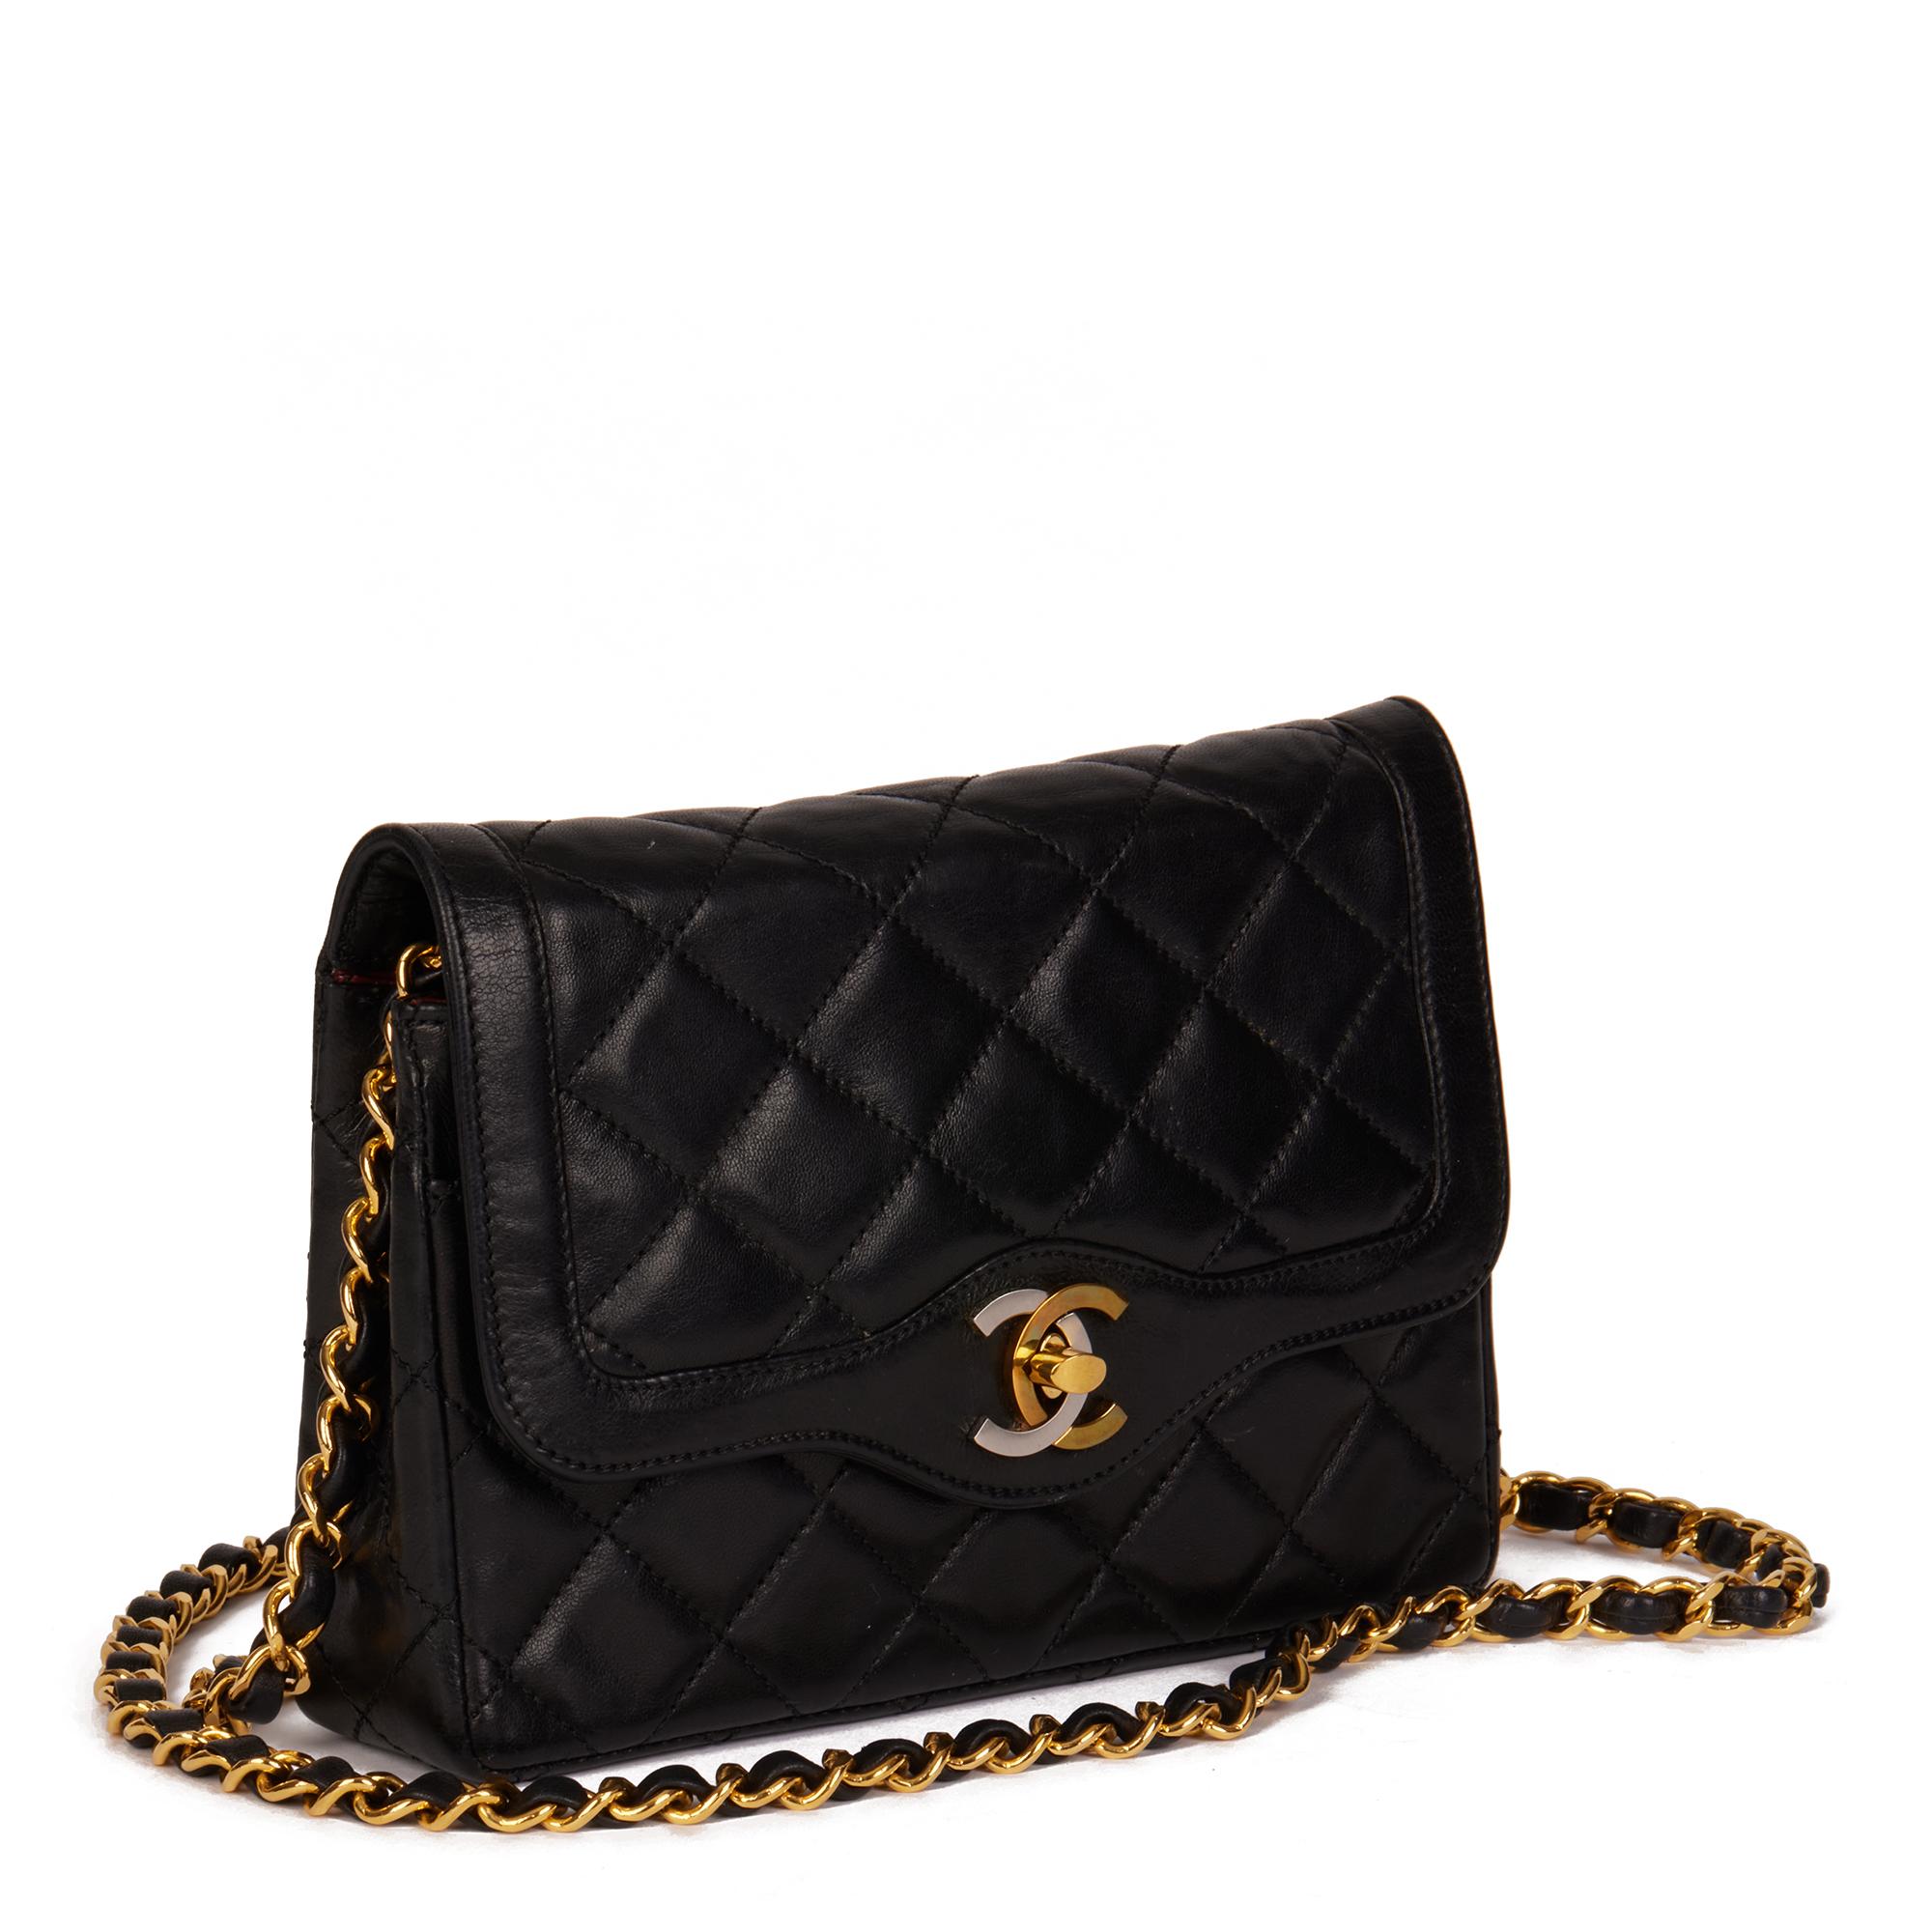 CHANEL
Black Quilted Lambskin Vintage Mini Paris-Limited Flap Bag

Xupes Reference: HB4330
Serial Number: 0995640
Age (Circa): 1989
Accompanied By: Chanel Dust Bag, Authenticity Card
Authenticity Details: Authenticity Card, Serial Sticker (Made in